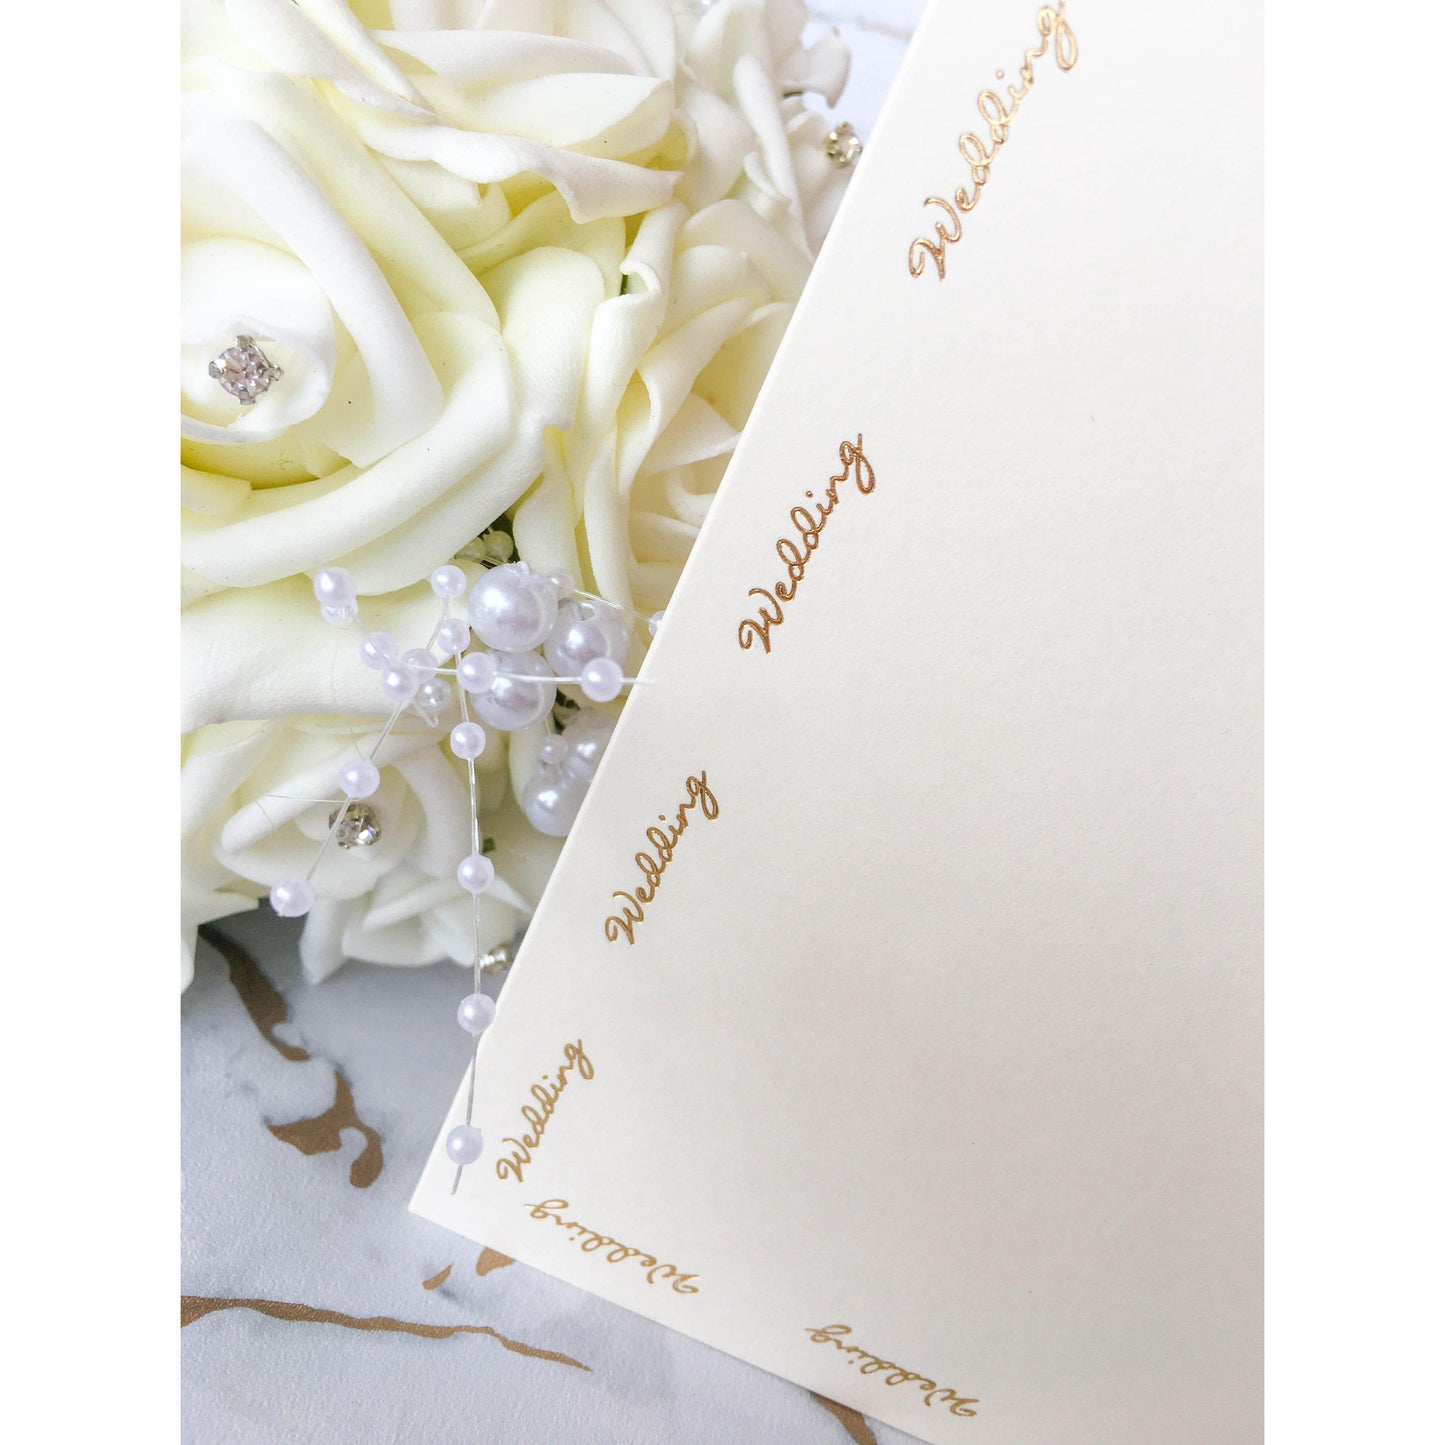 A5 Card Blanks Smooth Ivory With Gold Foil Wedding Script 10pk - Clearance-The Creative Bride